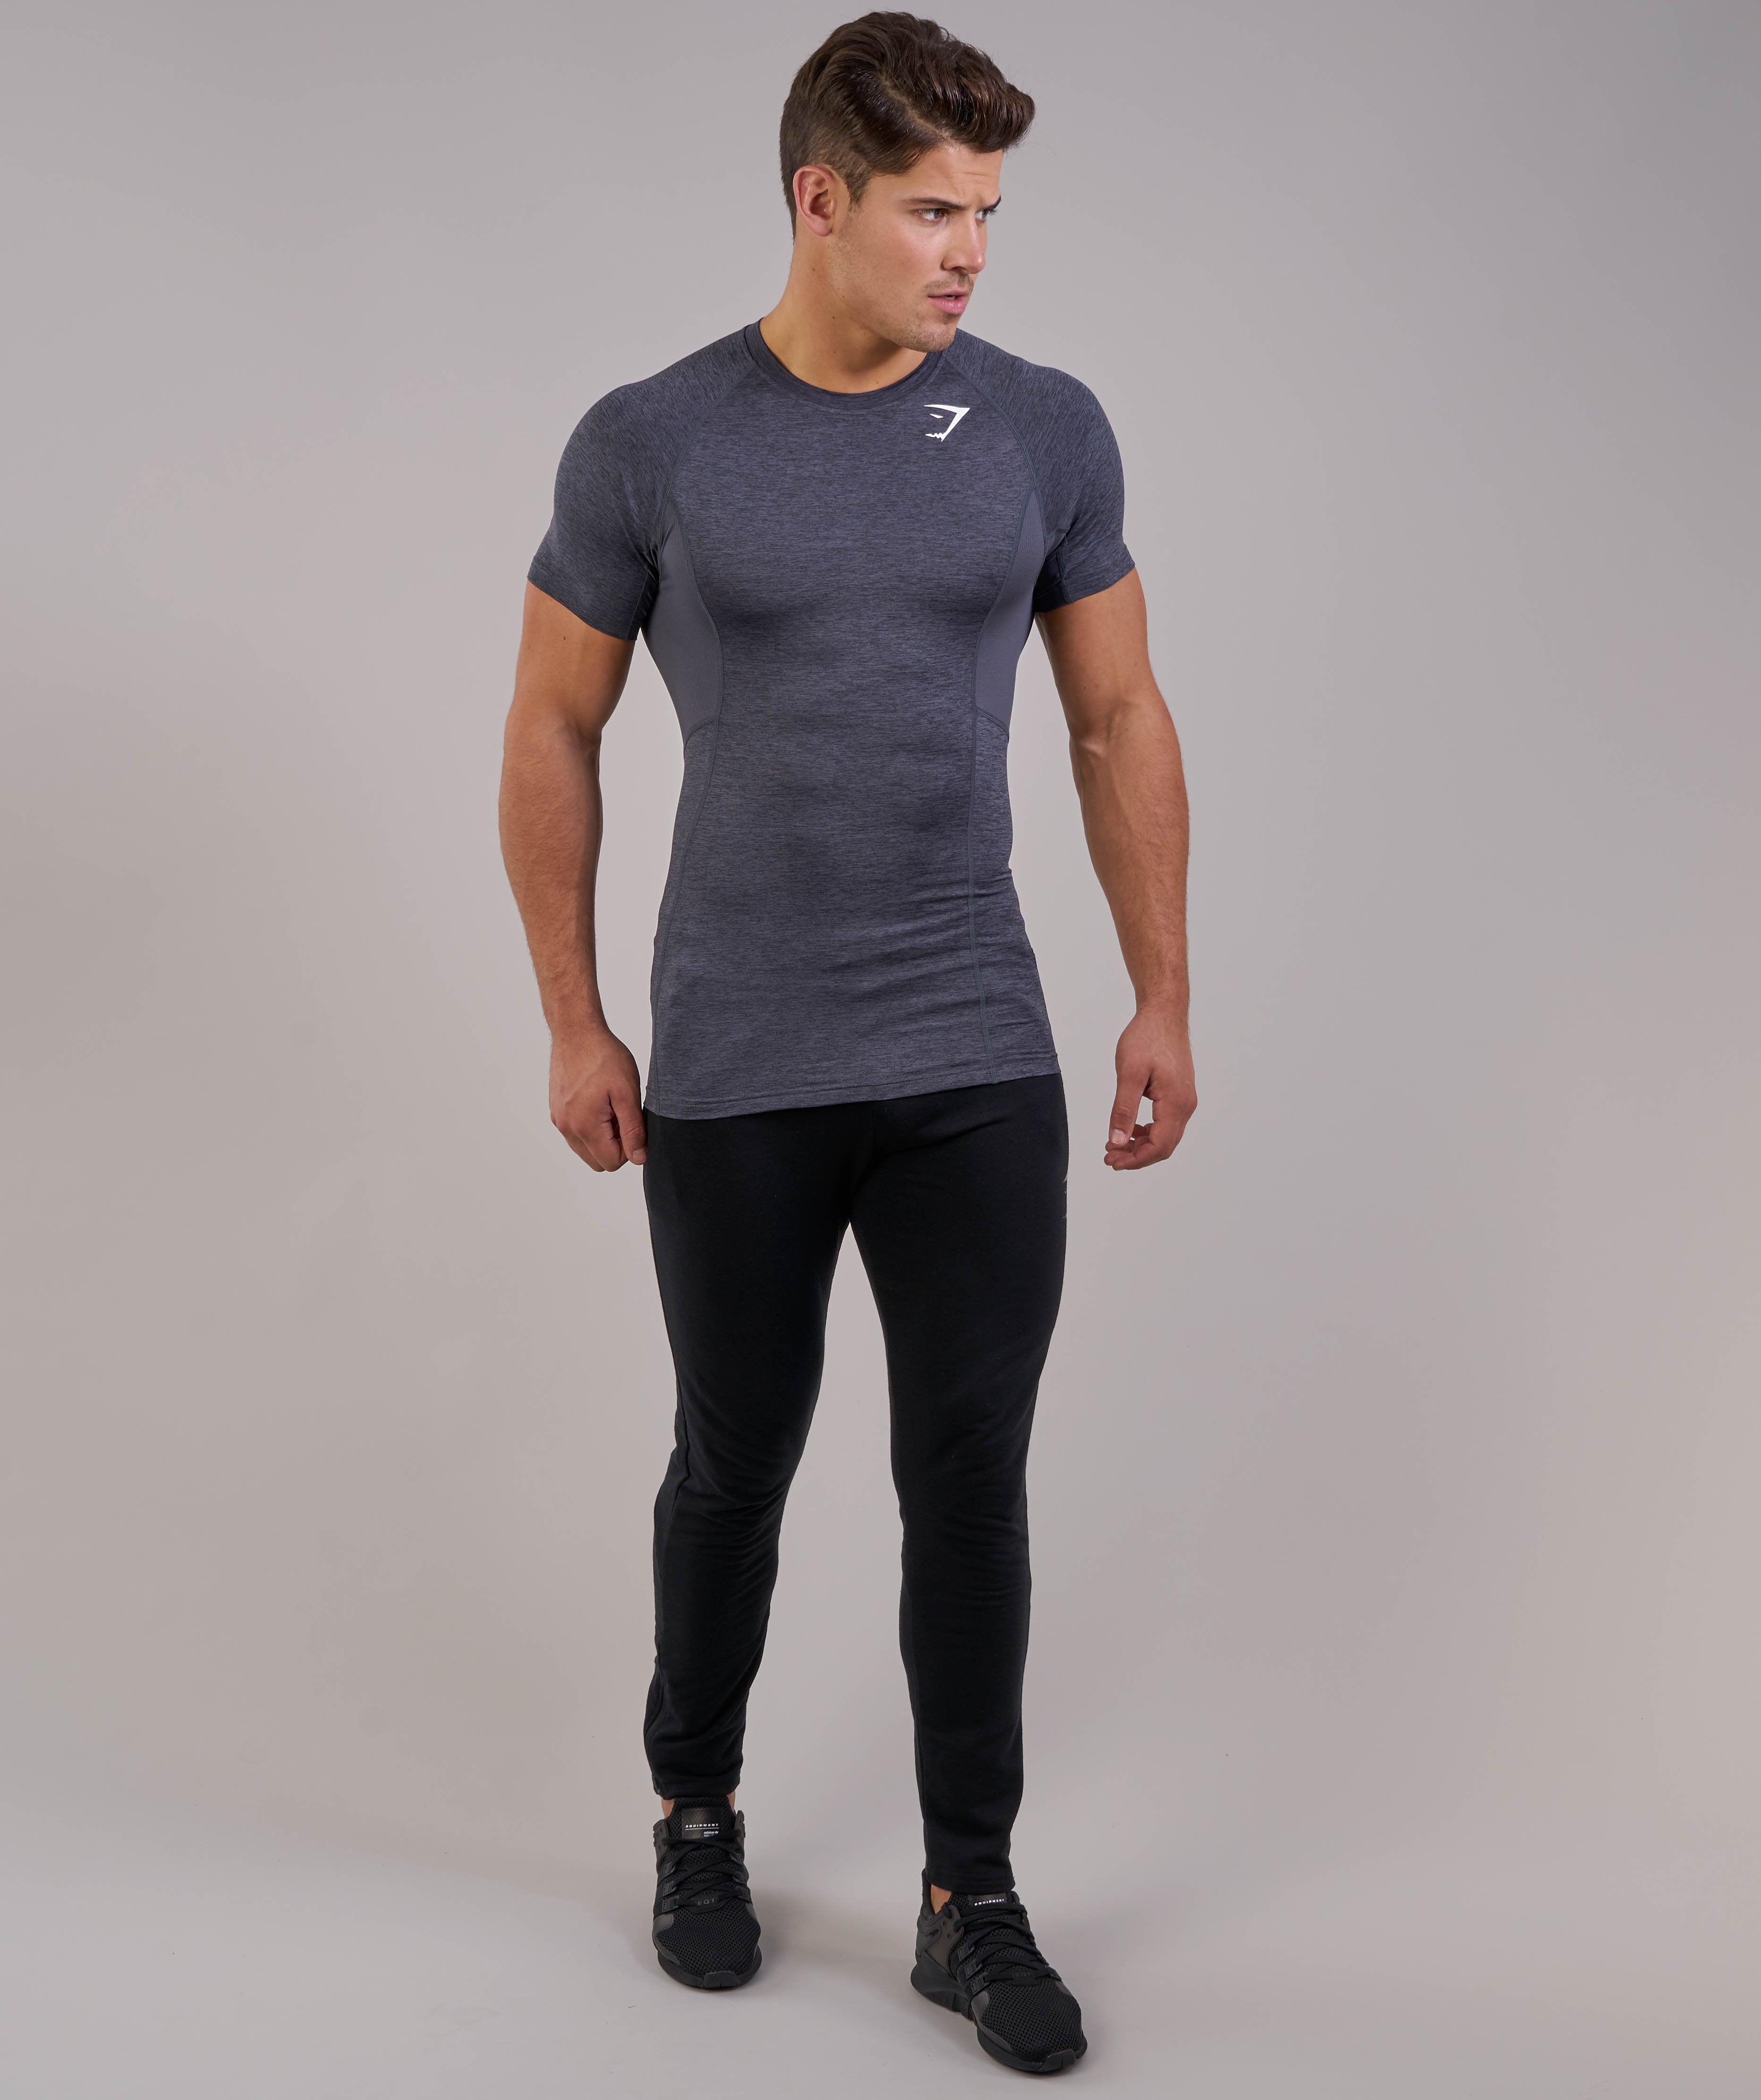 Element Baselayer Short Sleeve Top in Charcoal Marl - view 4